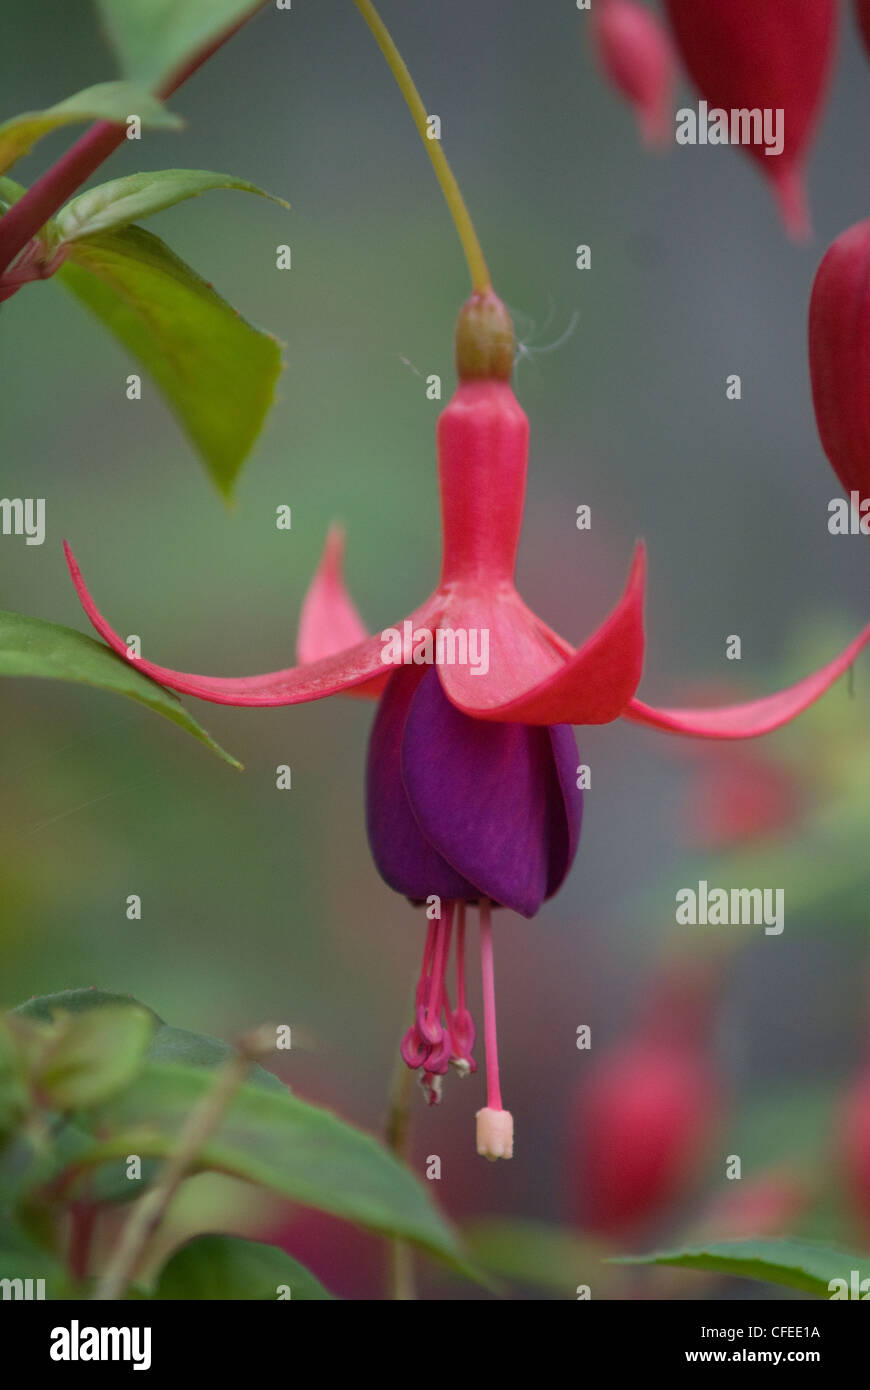 Fuchsia Ballerina High Resolution Stock Photography and Images - Alamy